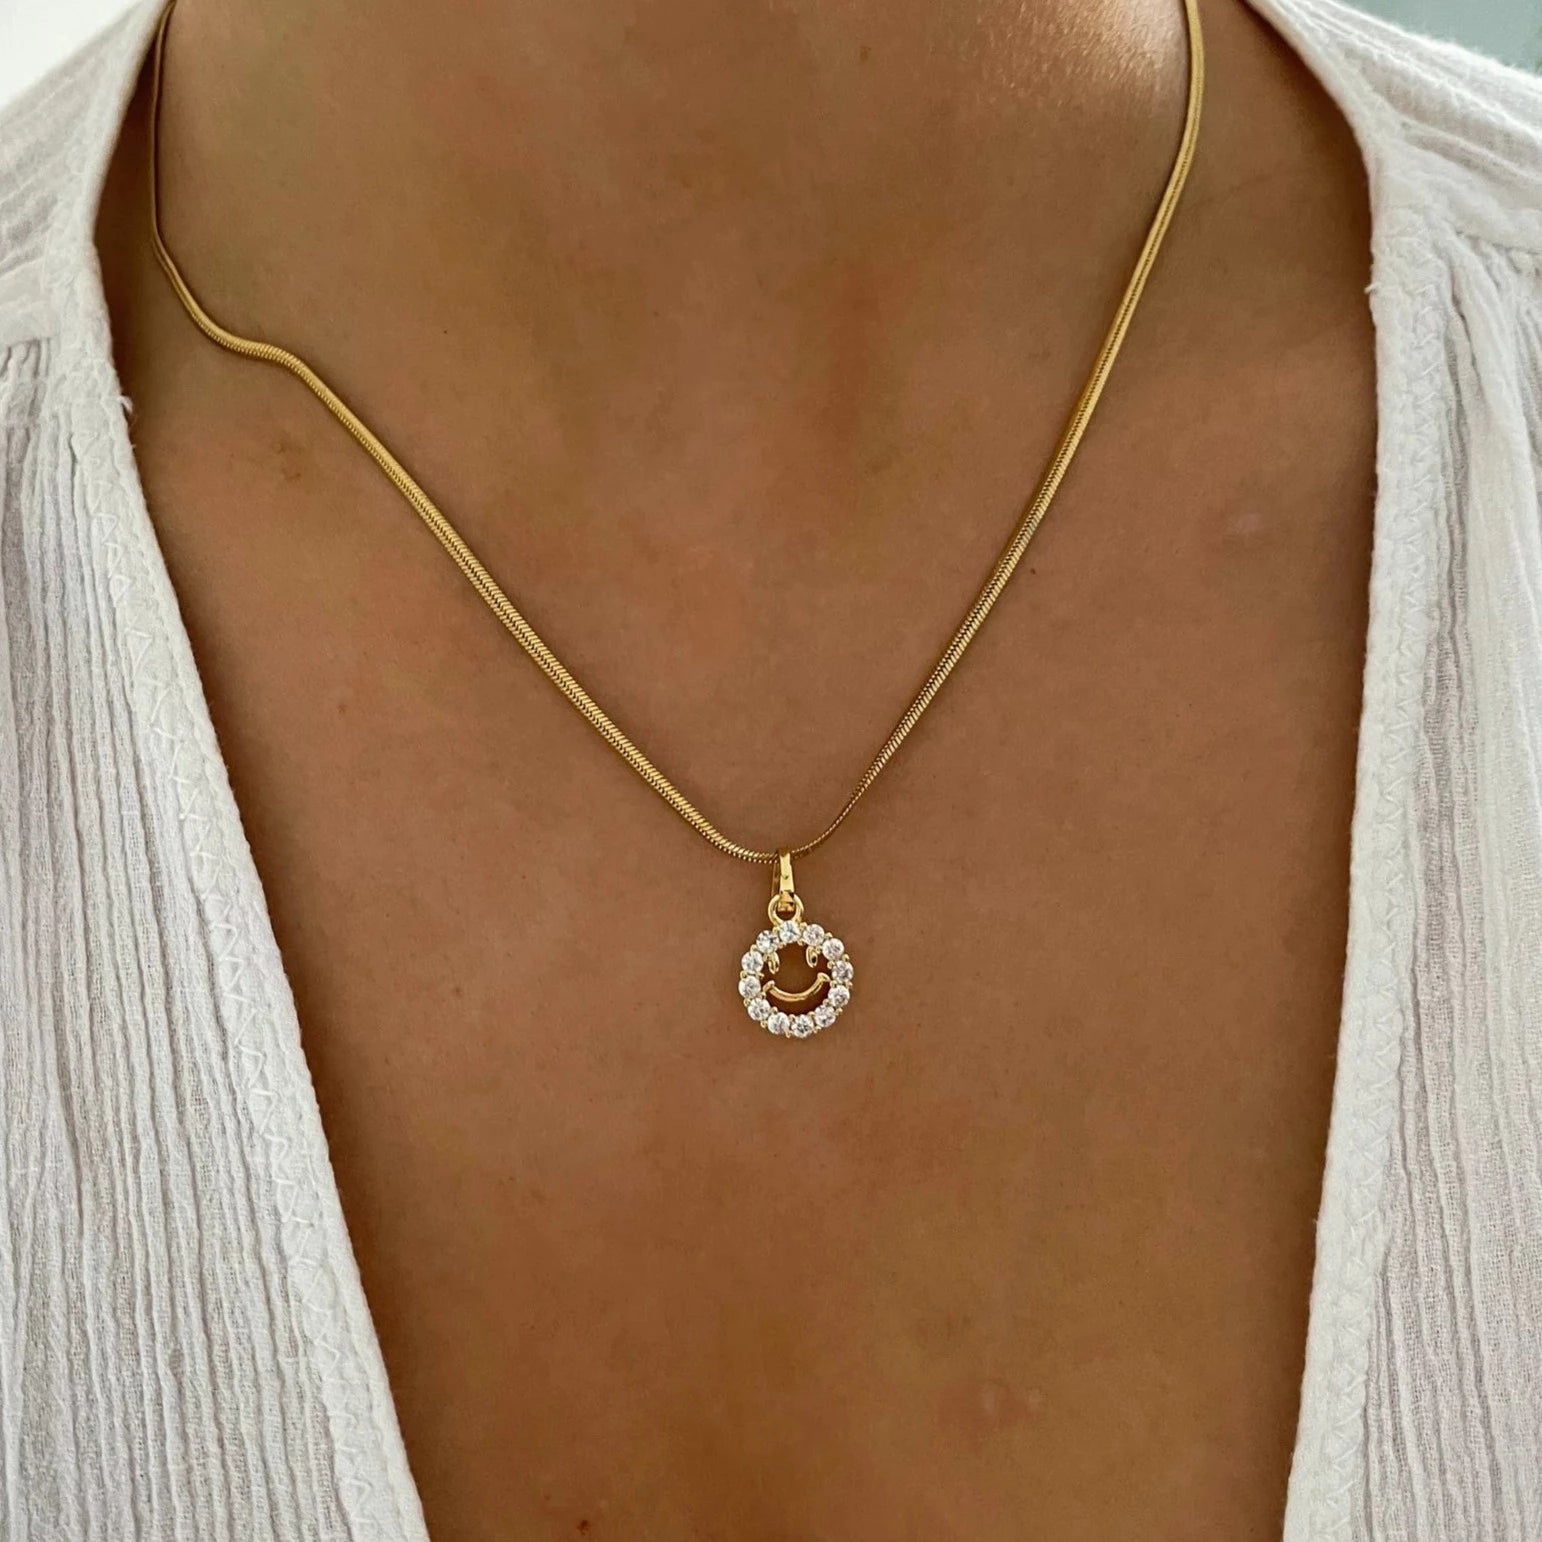 Smiley Necklace - Cosmic Chains 